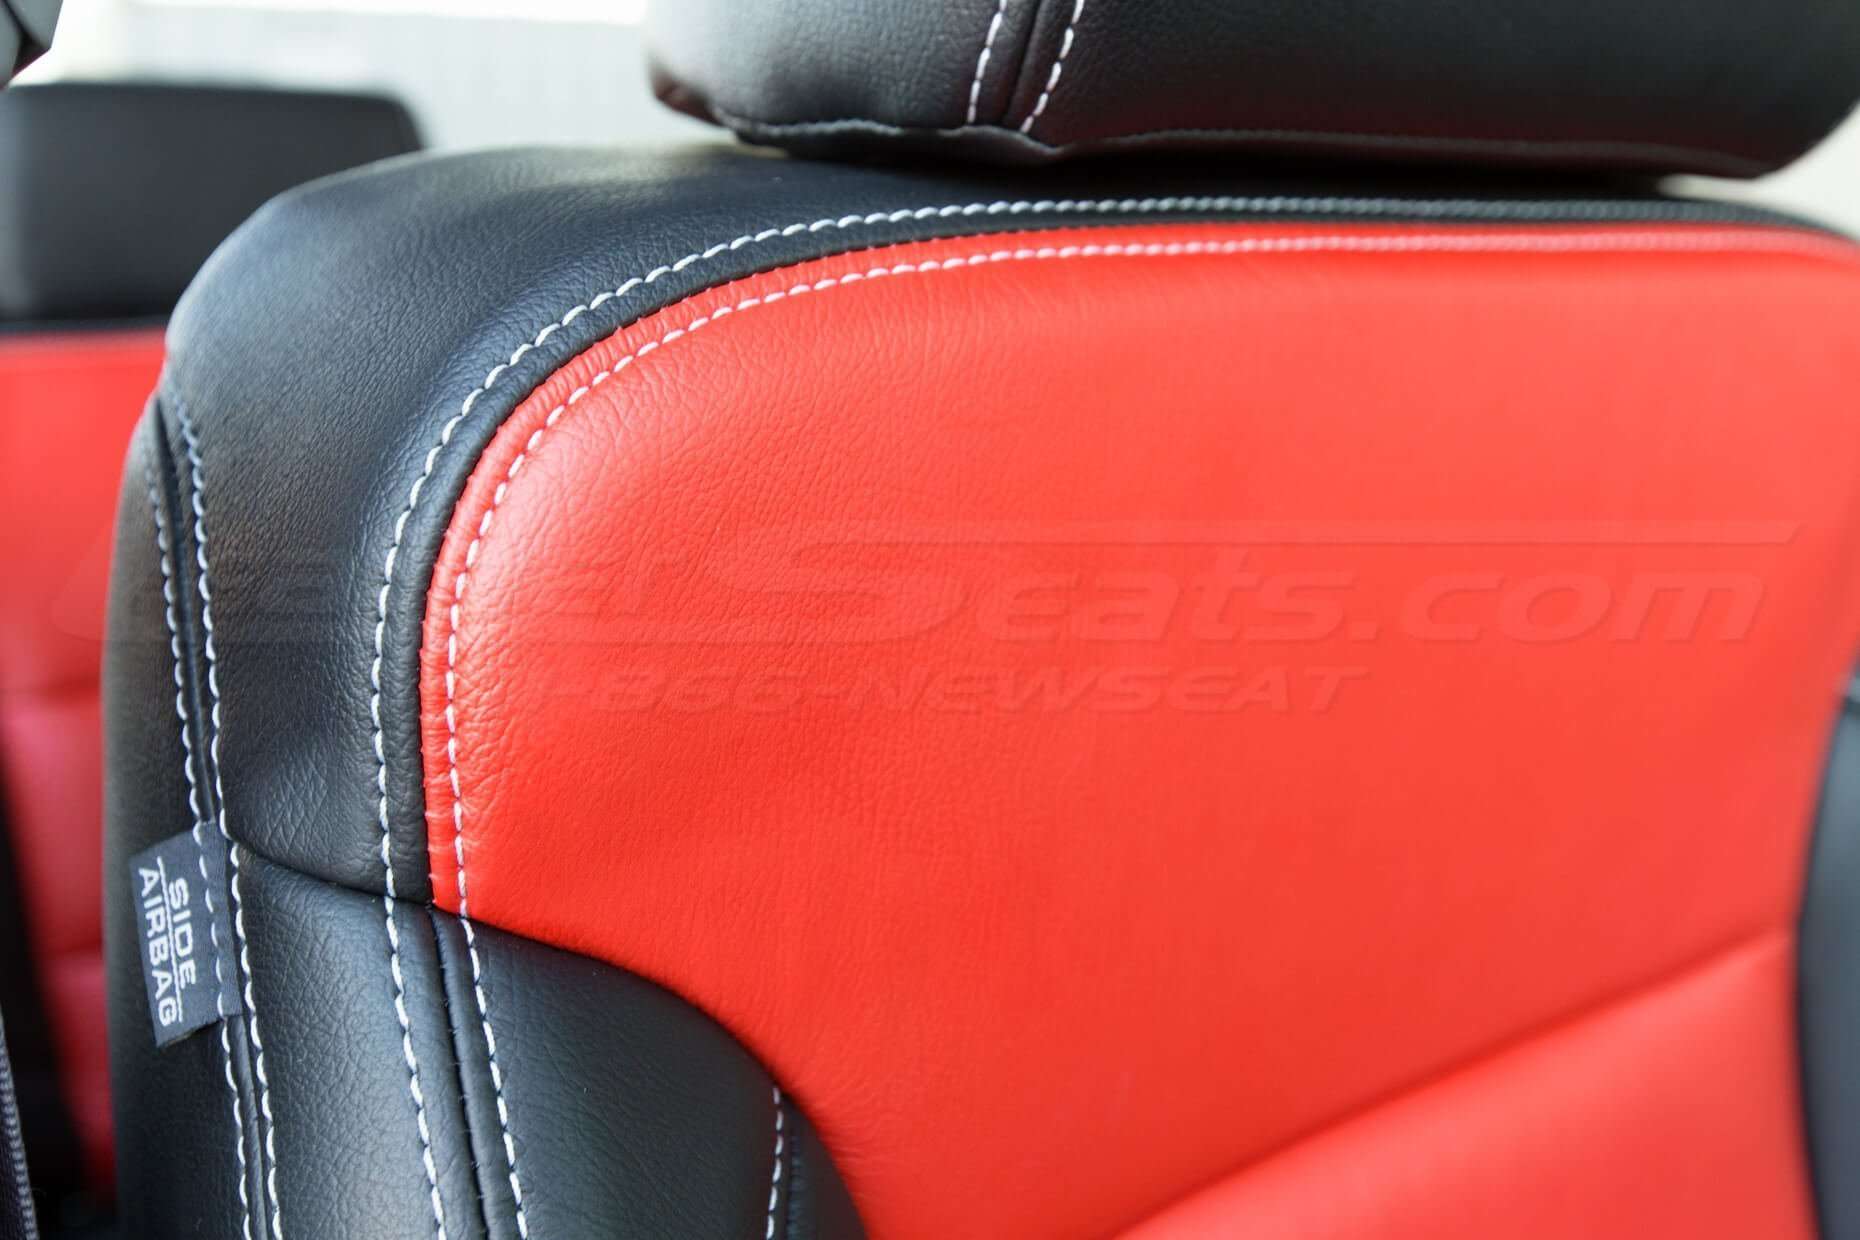 GMC Sierra leather upholstery kit - Black and Bright Red - Front double- stitching close-up